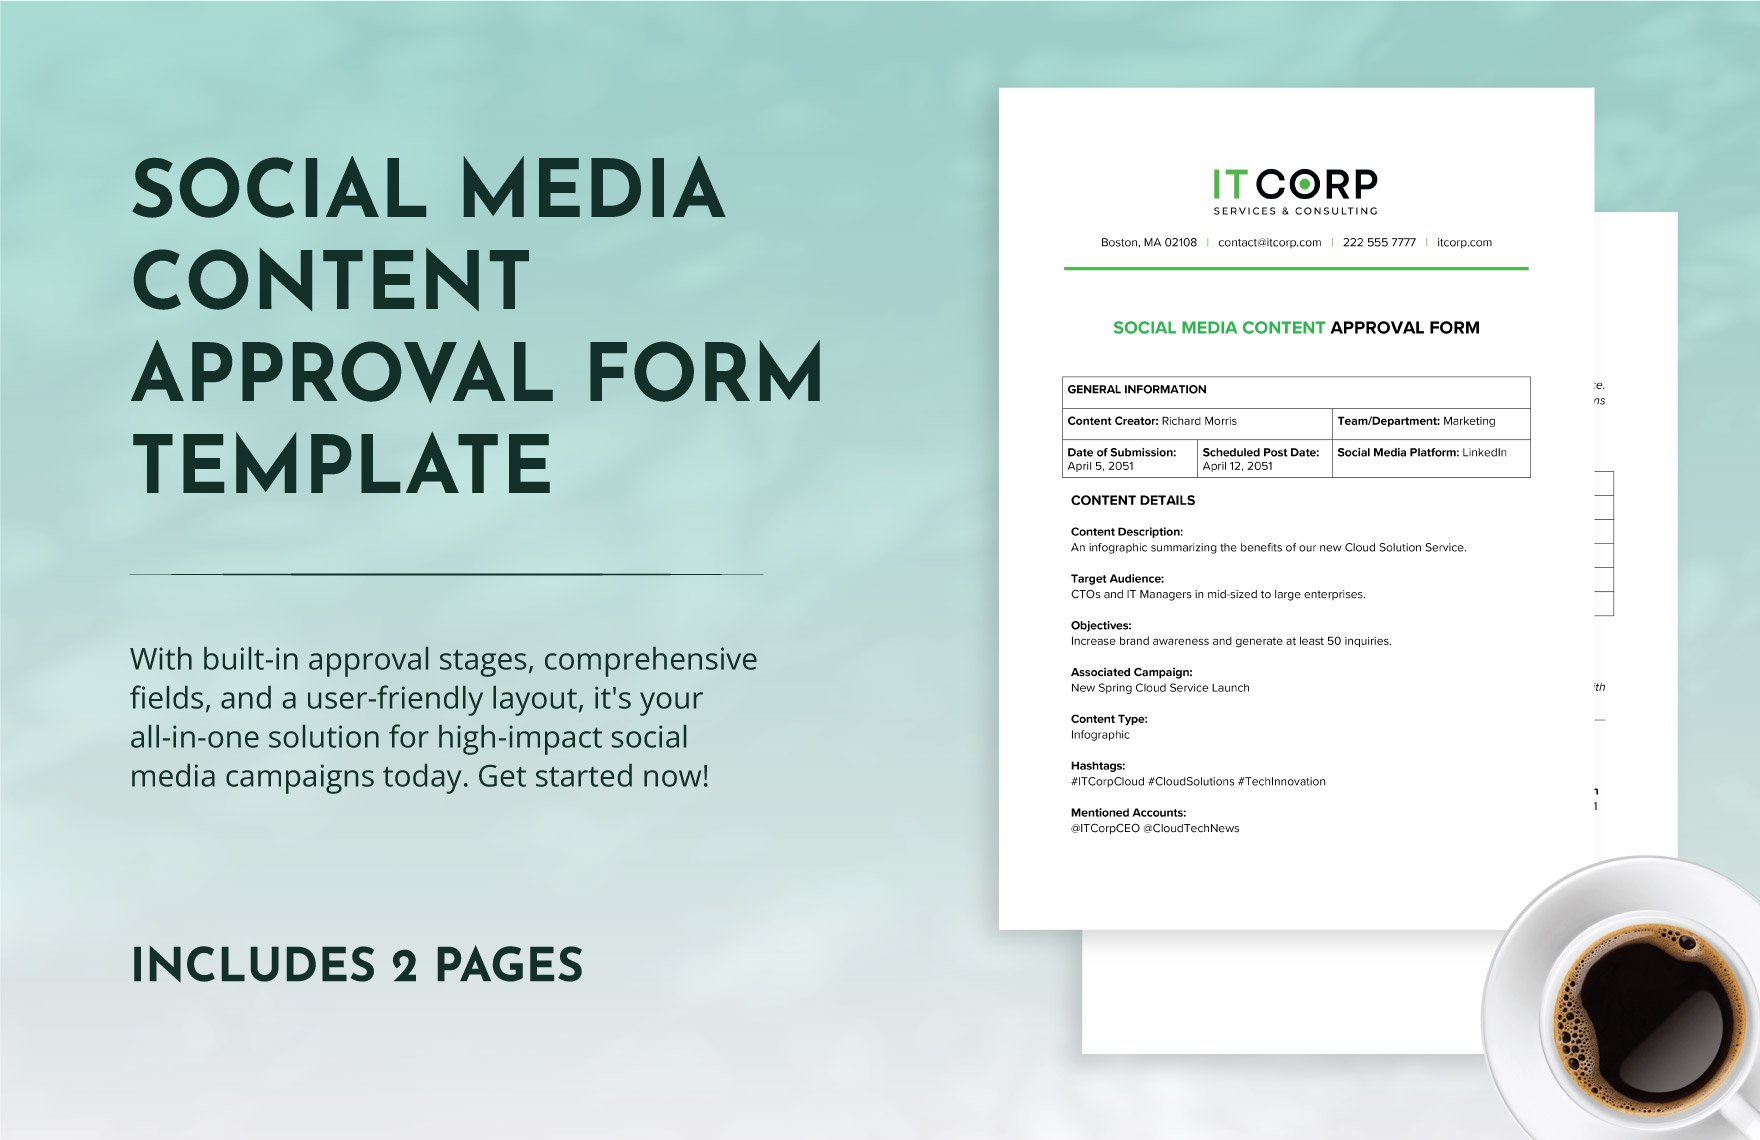 Social Media Content Approval Form Template in Word, Google Docs, PDF